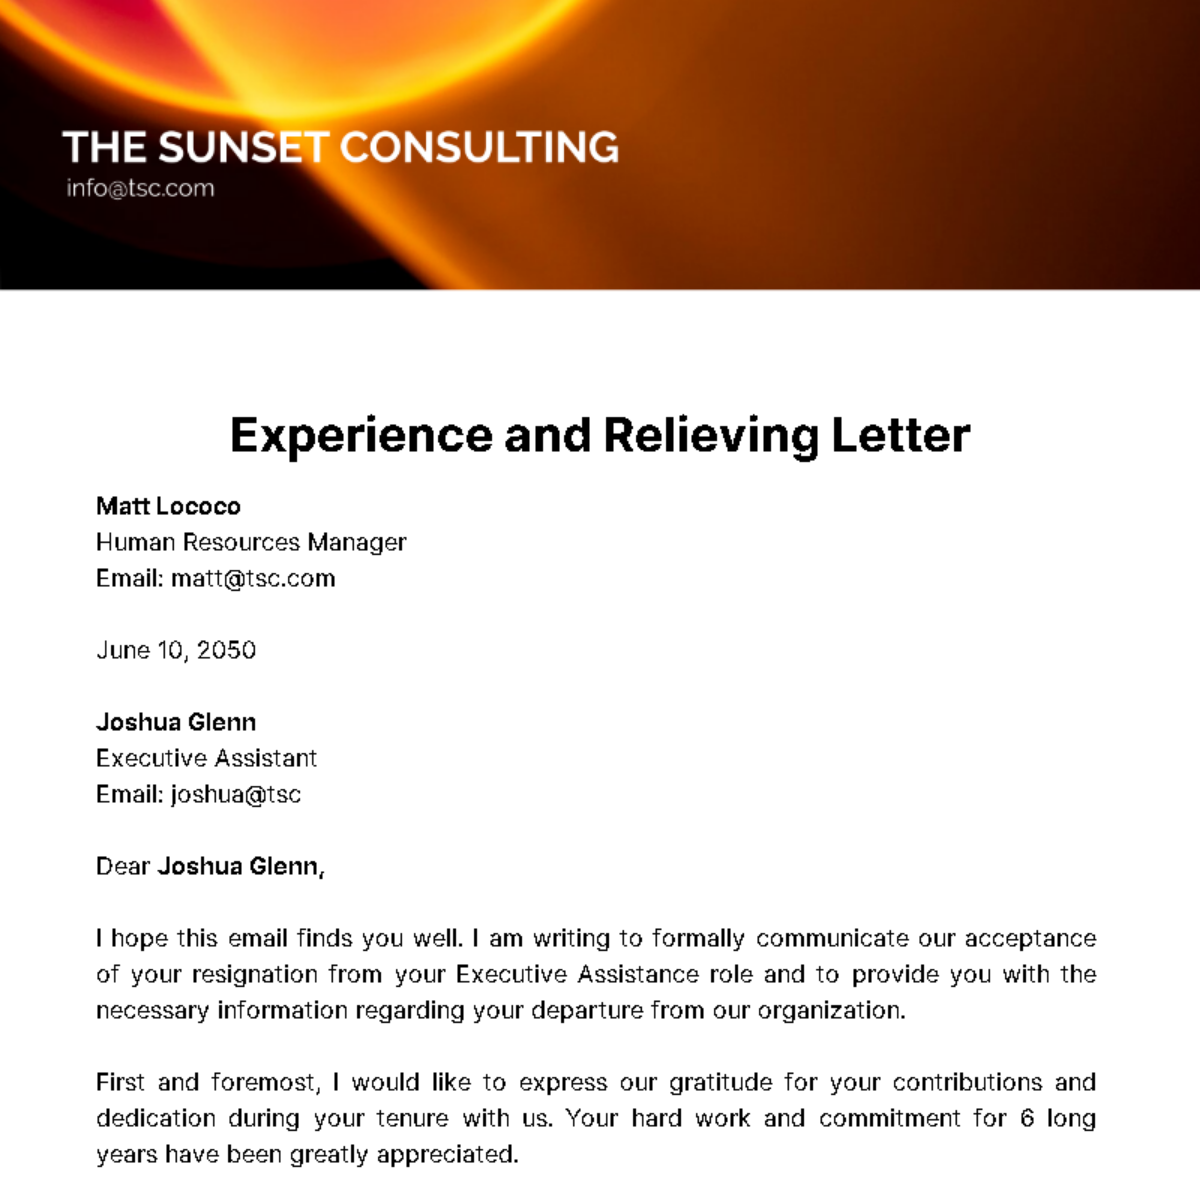 Experience and Relieving Letter Template